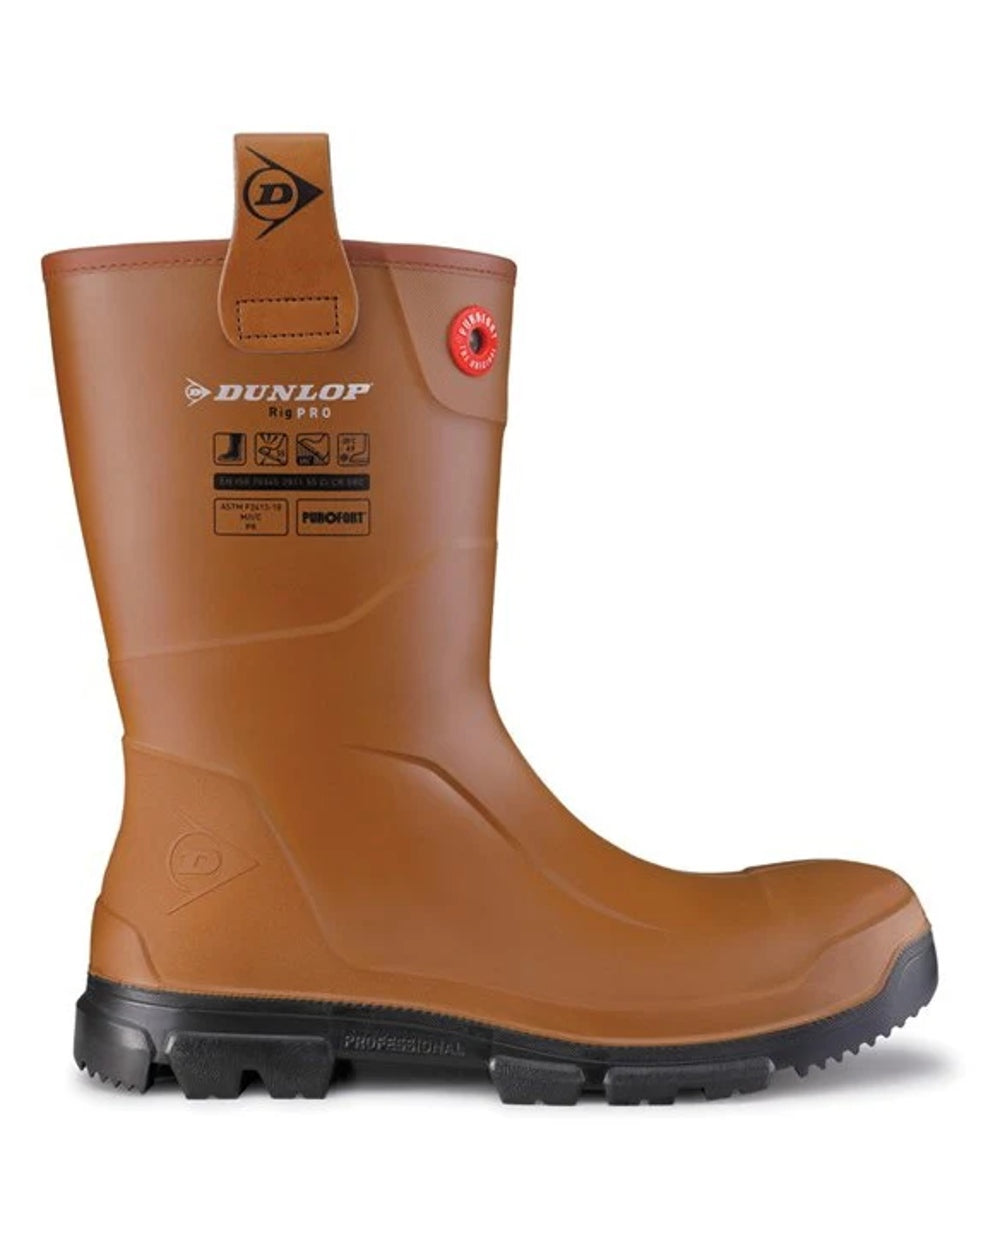 Brown/Black coloured Dunlop Purofort RigPRO Full Safety Fur Lining Wellingtons on white background 